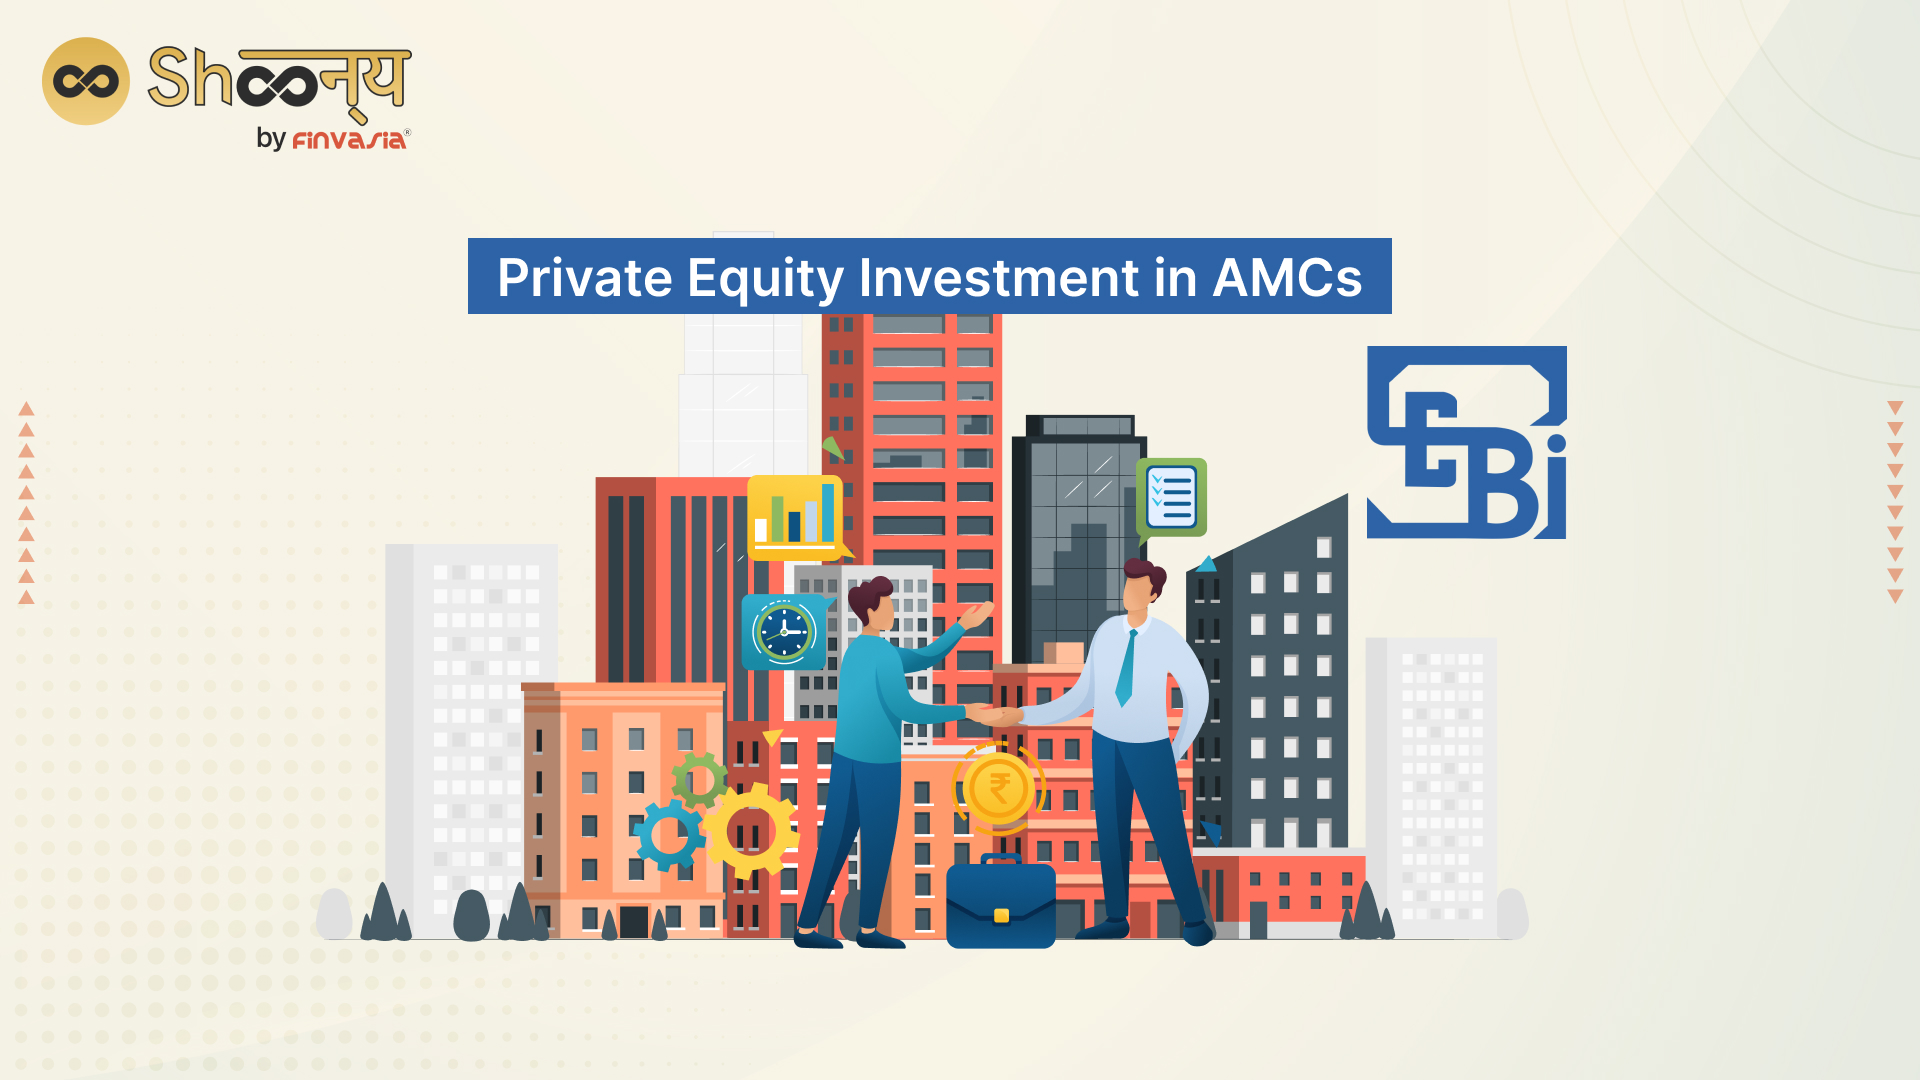 Breaking Barriers: SEBI allows Private Equity Investment in AMCs